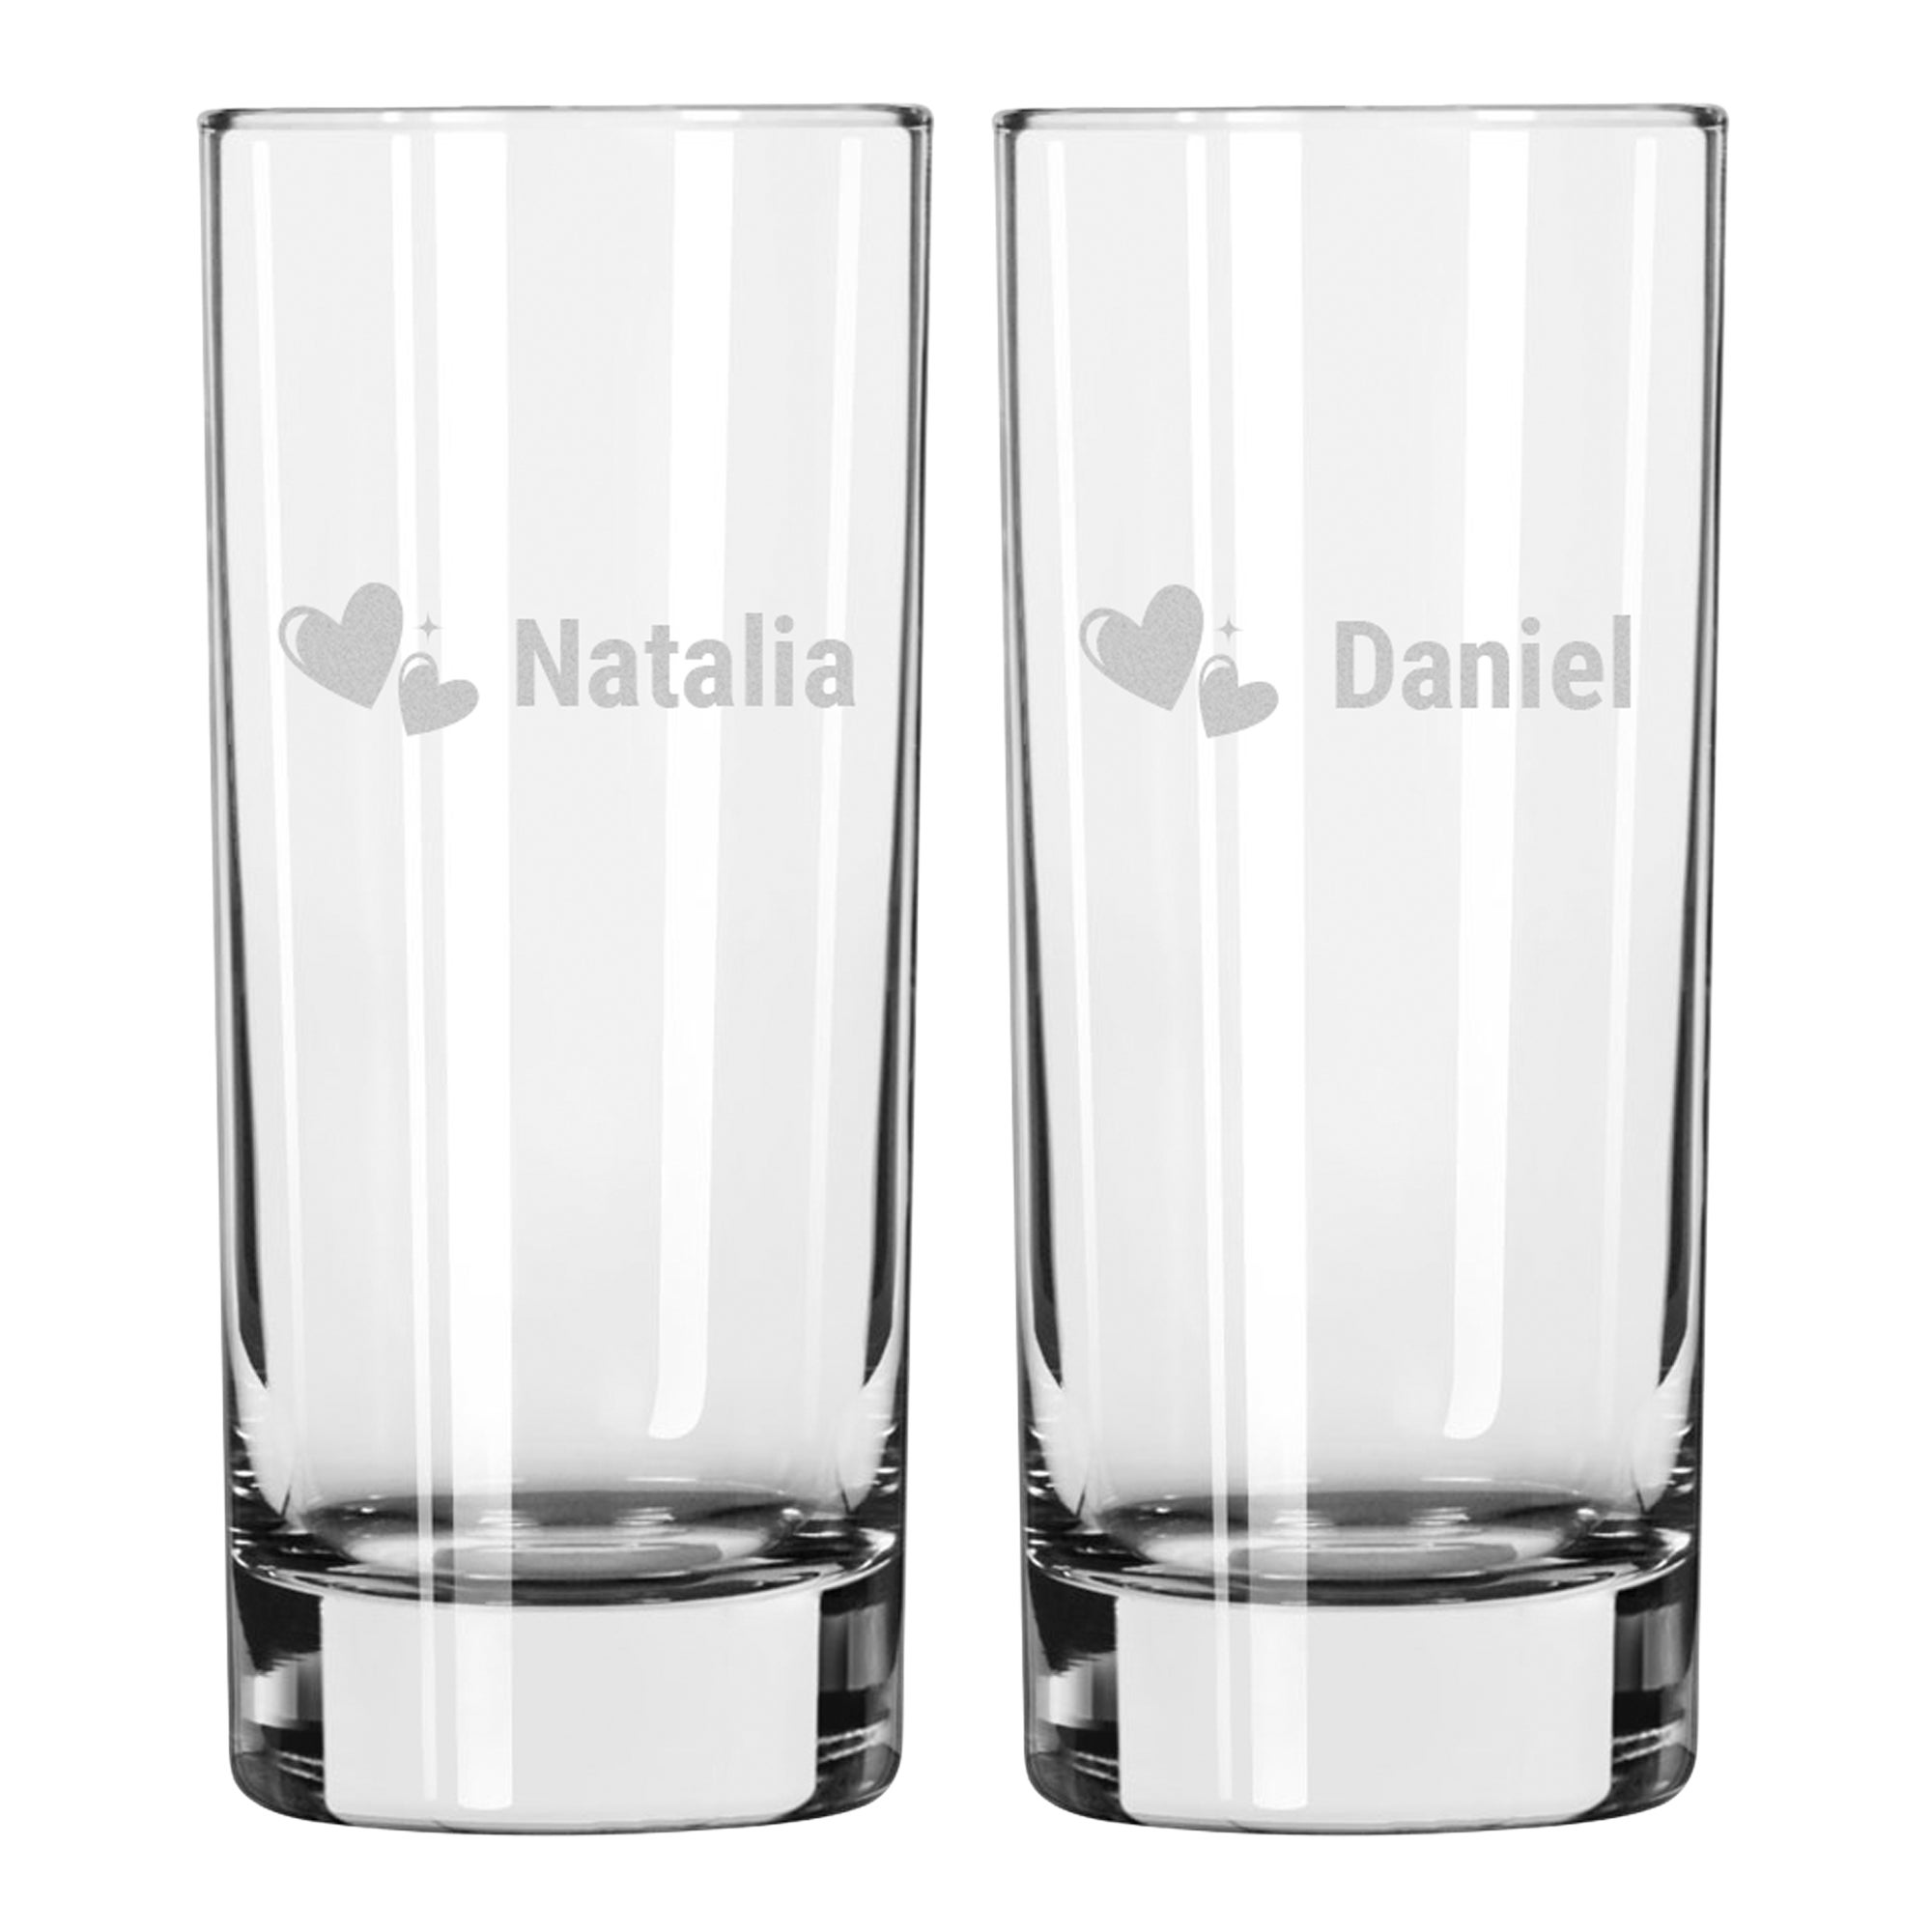 Personalised highball glass - Engraved - 2 pcs